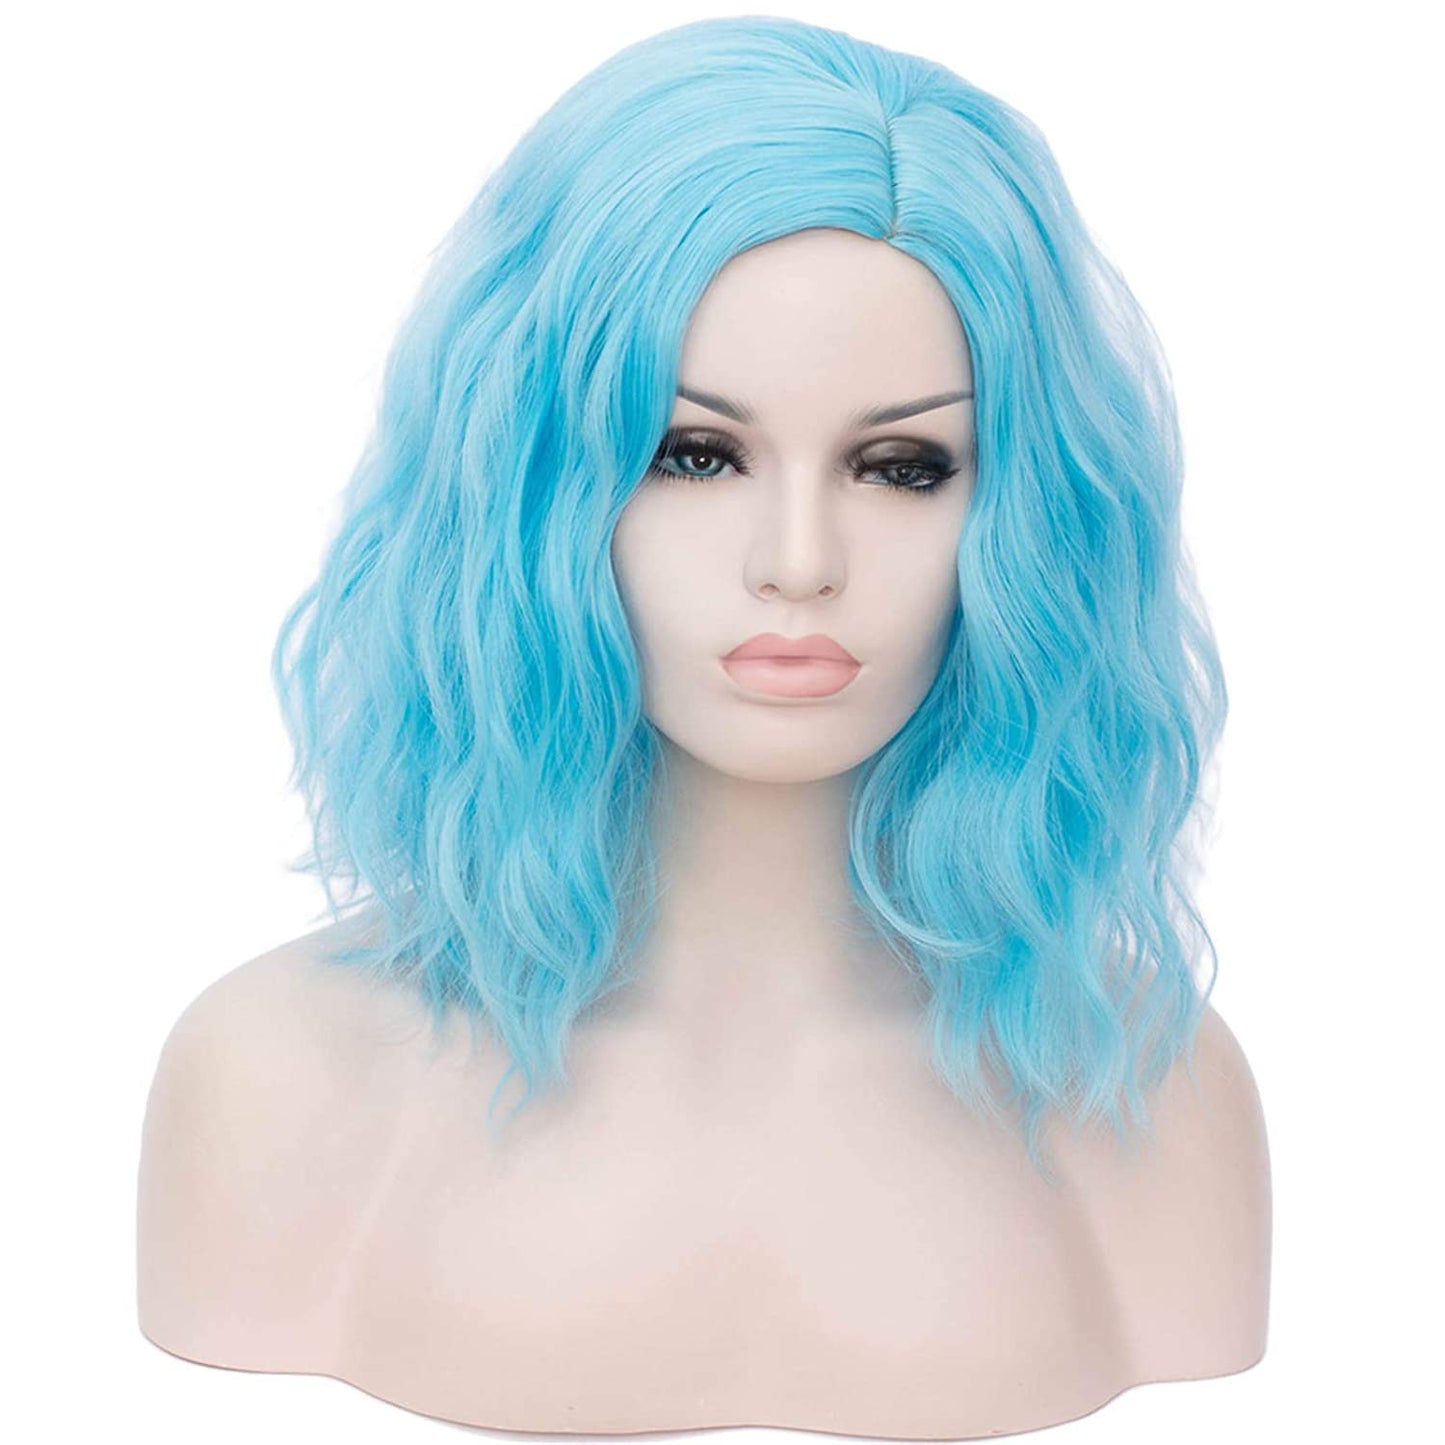 light blue kylie jenner wig ,white women wigs HAIR Synthetic Curly Bob Wig with Bangs Short Bob Wavy Hair Wigs Wine Red Color Wigs for Women Bob Style Synthetic Heat Resistant Bob Wigs.